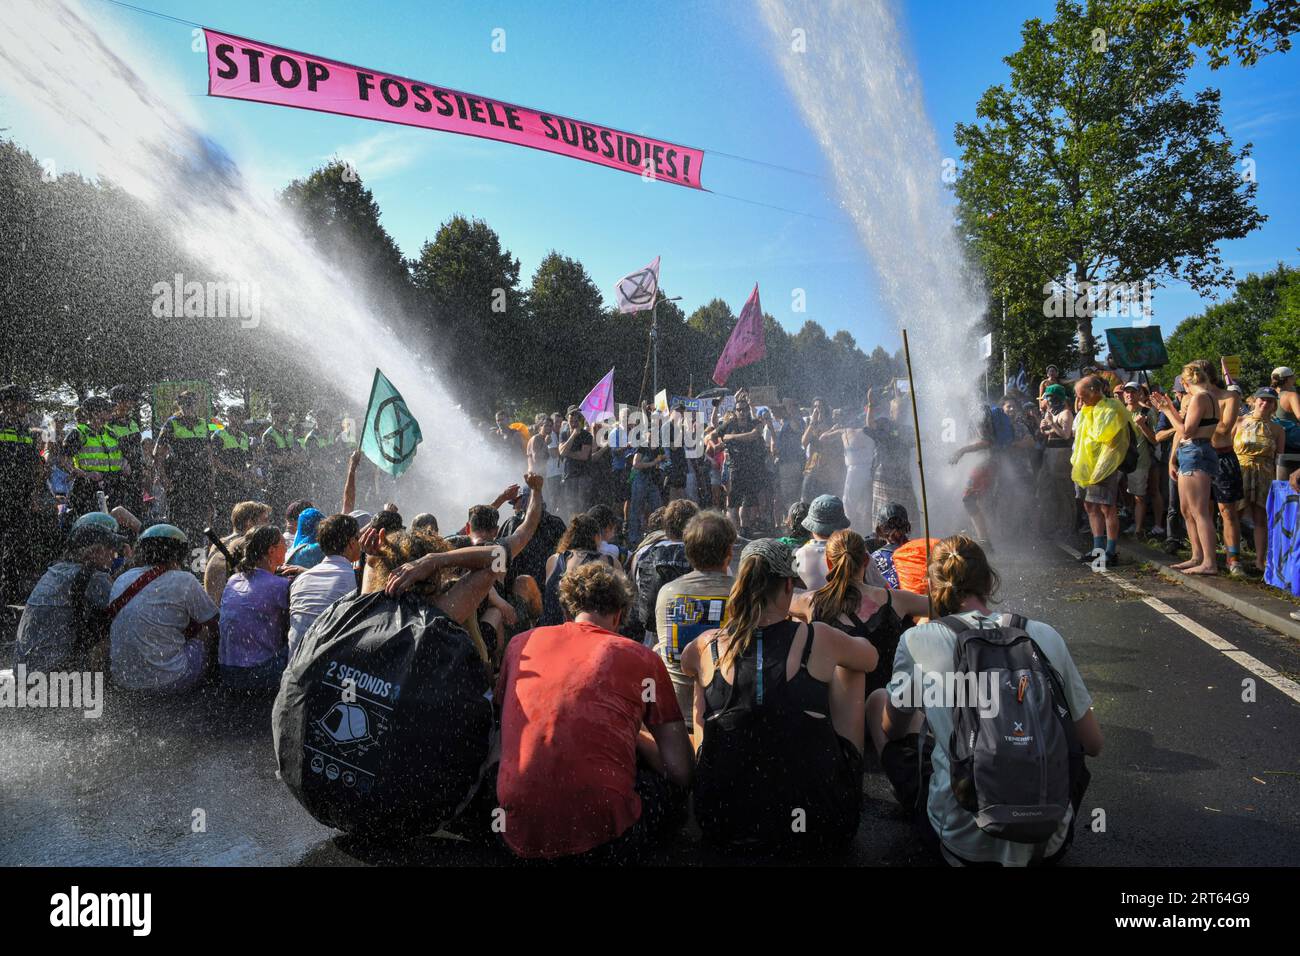 The Hague,The Netherlands, 9th september,2023. For the 8th time thousands of Extinction rebellion activists protested against fossil fuels subsidies by blocking the A12 motorway. Watercannons were used and police removed and arrested hundreds of people. Stock Photo